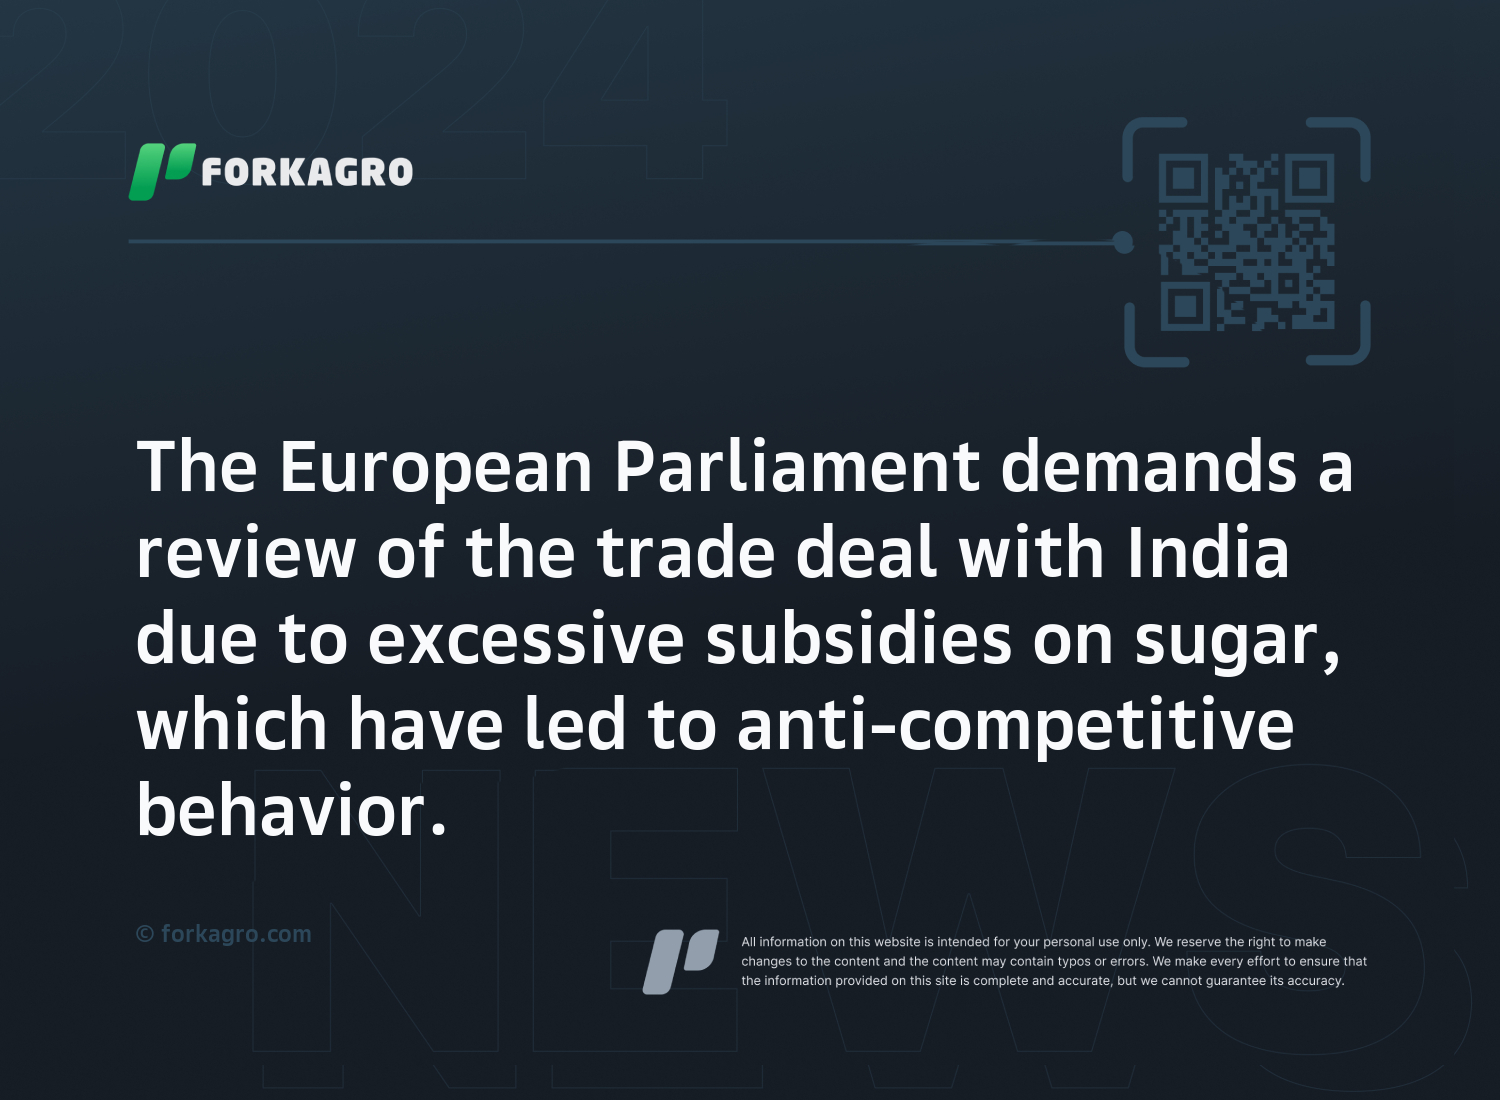 The European Parliament demands a review of the trade deal with India due to excessive subsidies on sugar, which have led to anti-competitive behavior.